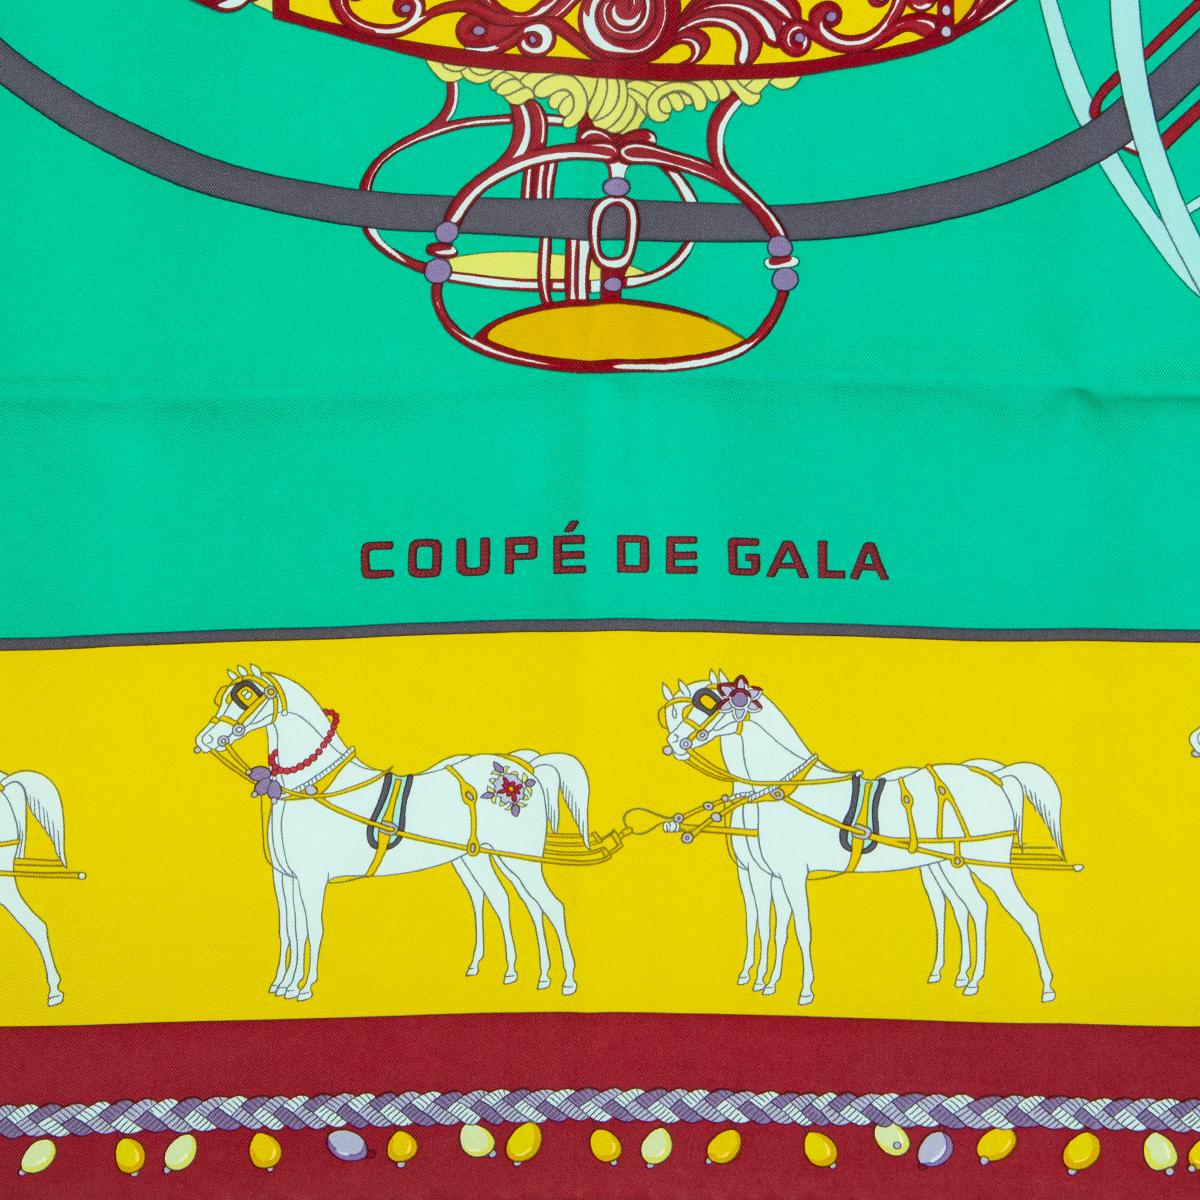 Hermes 'Coupe de Gala 90' scarf in bright mint green wash silk (100%) with burgundy border and contrasting pale blue hem and details in mustard and purple. Brand new with tag.

Width 90cm (35.1in)
Height 90cm (35.1in)